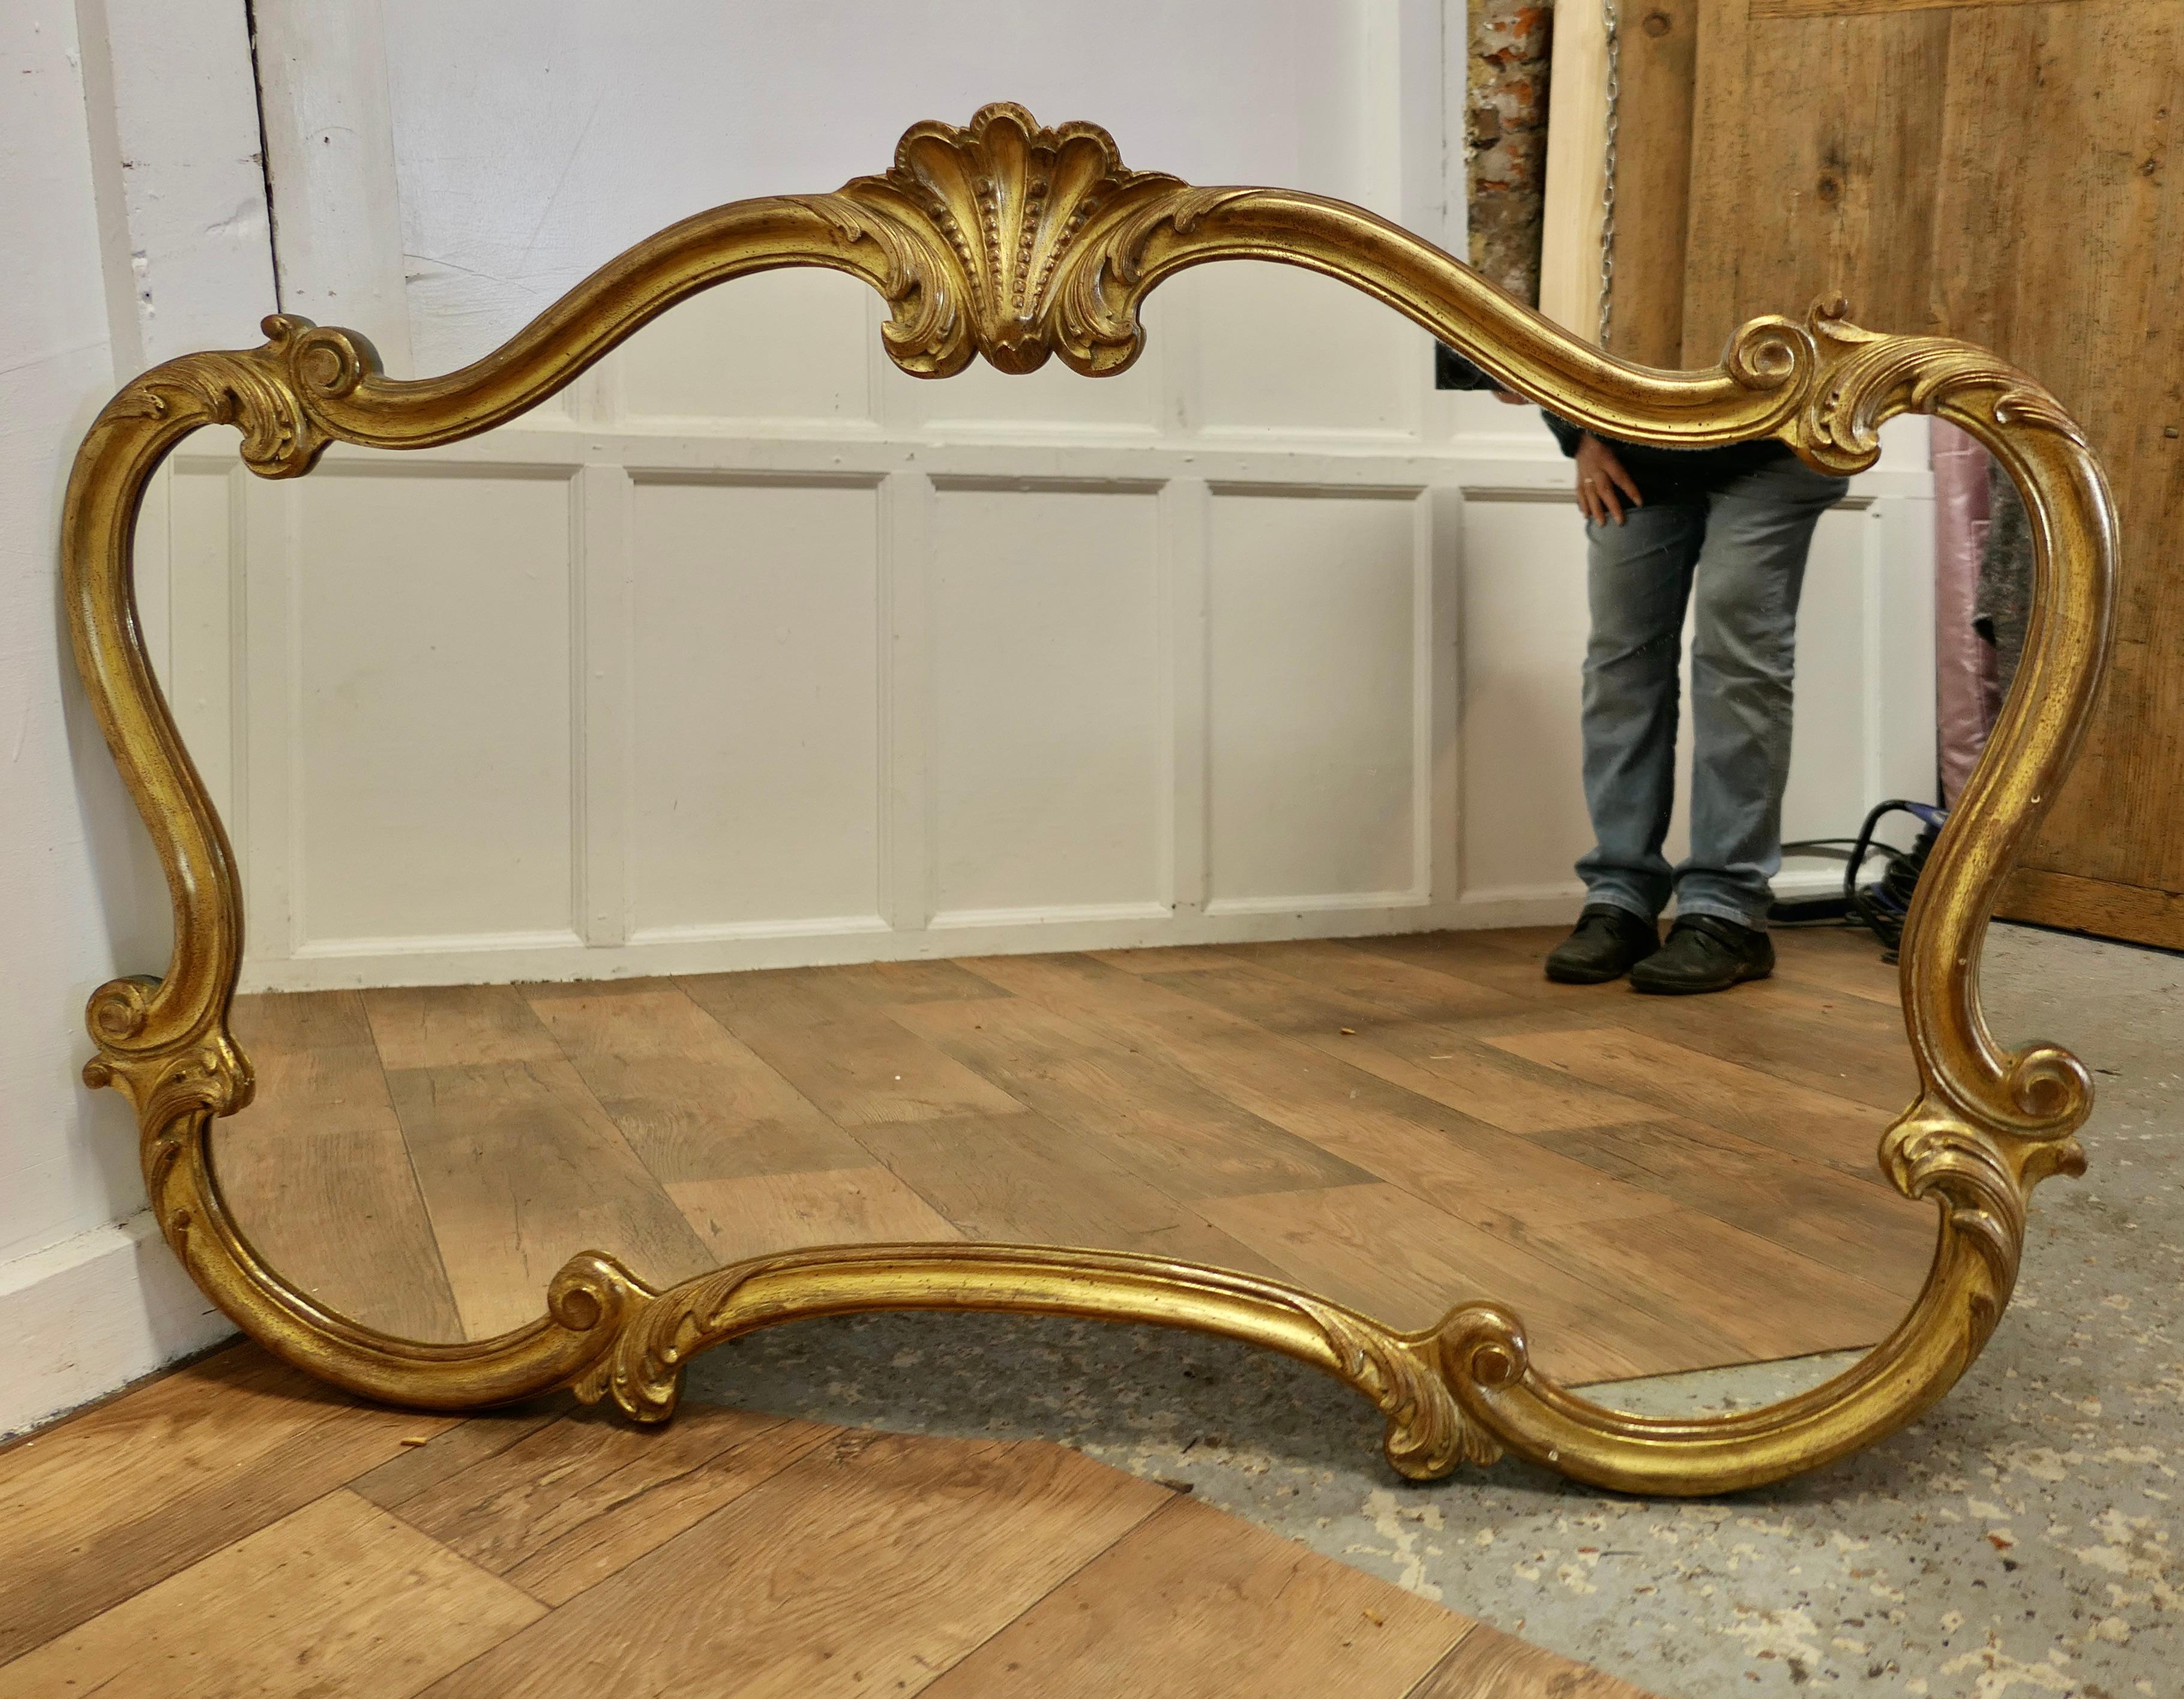 A Superb Large French Gilt Scallop Shaped Overmantel  

This is a Striking piece it has a scroll shape with curved corners there is a carved shell decoration at the top with entwined leaves around the border, which has green/blue edge
The mirror is